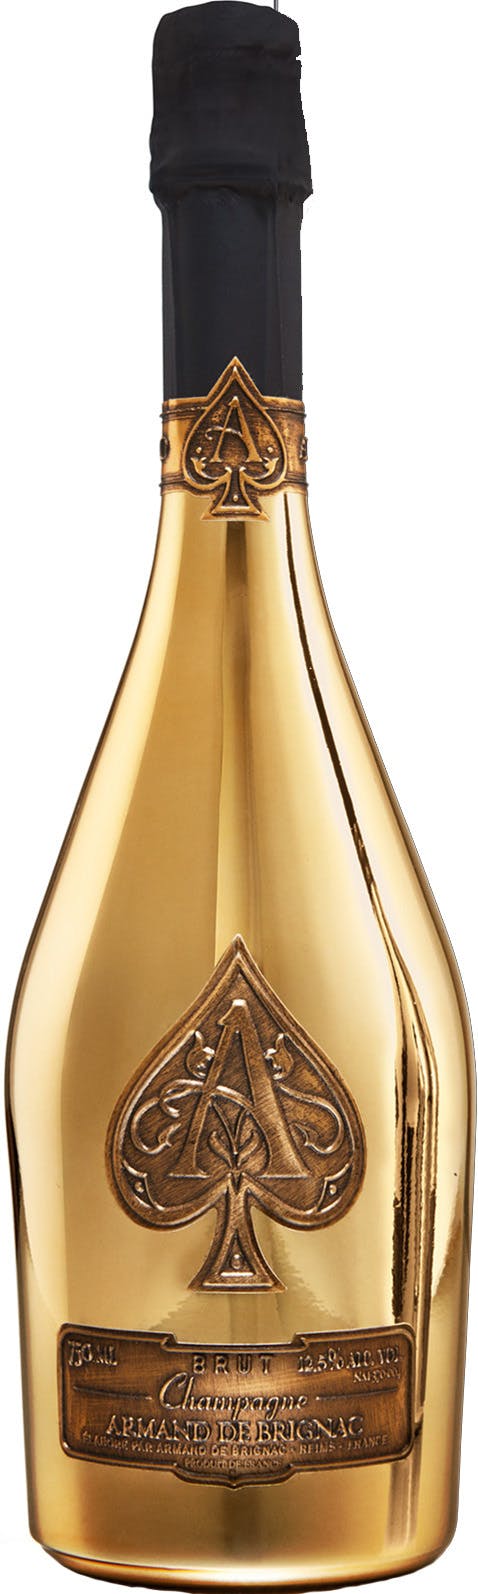 ACE OF SPADE BRUT CHAMPAGE GOLDEN BOTTLE - A to Z Liquors